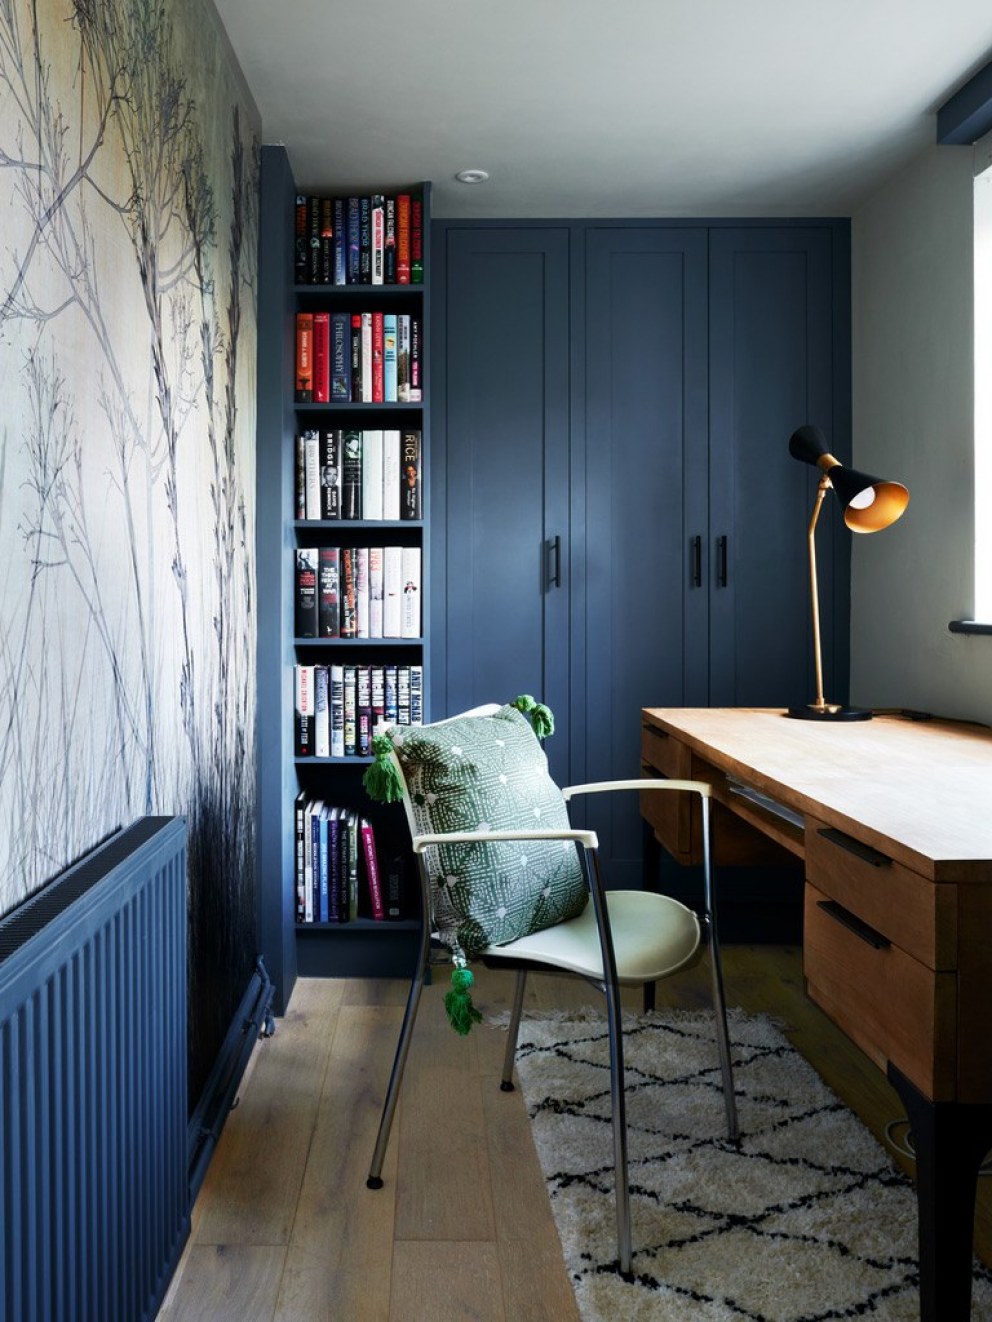 The Old School House | Old School House study | Interior Designers